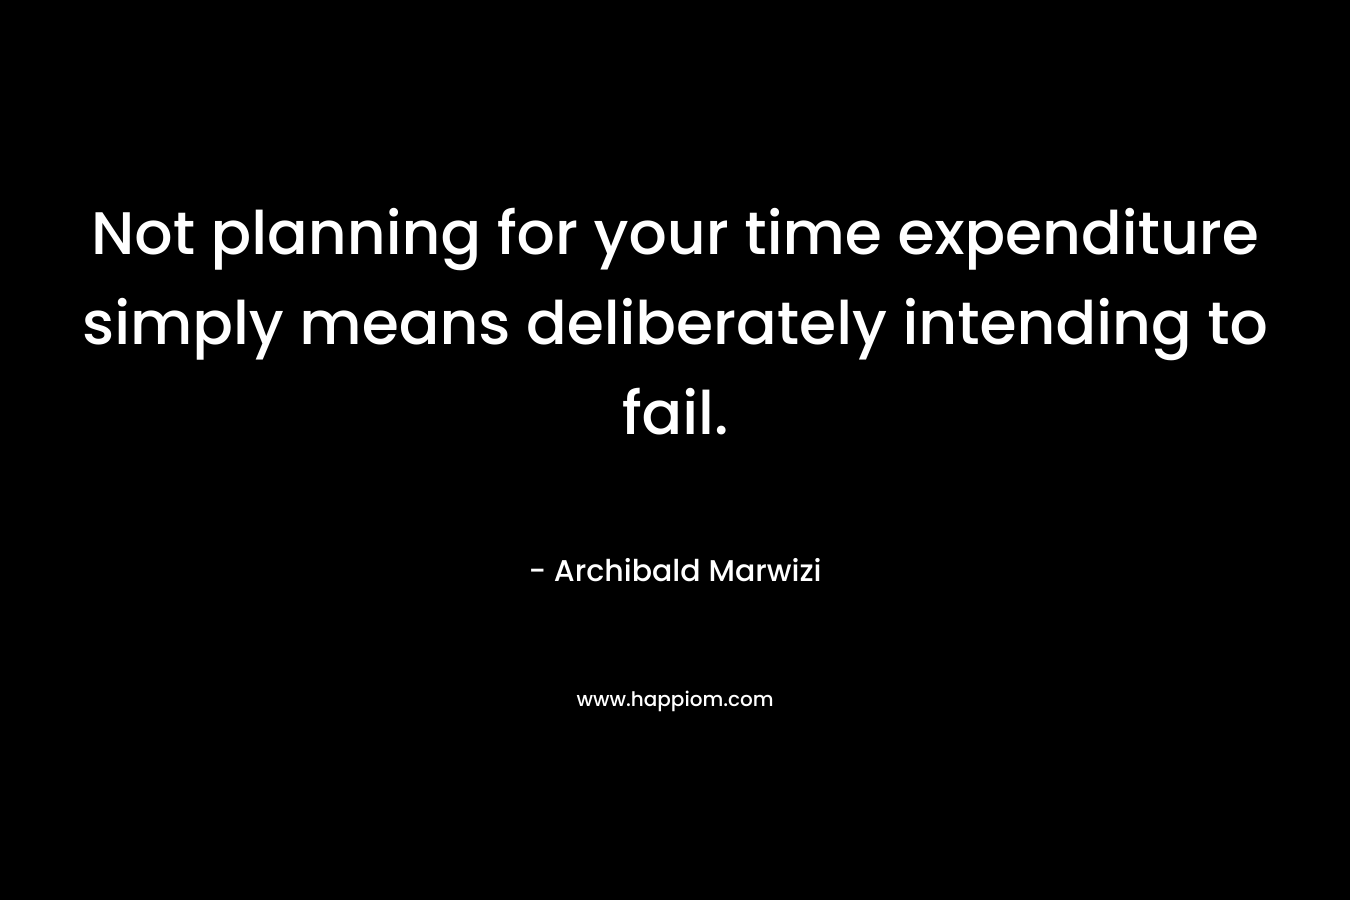 Not planning for your time expenditure simply means deliberately intending to fail.